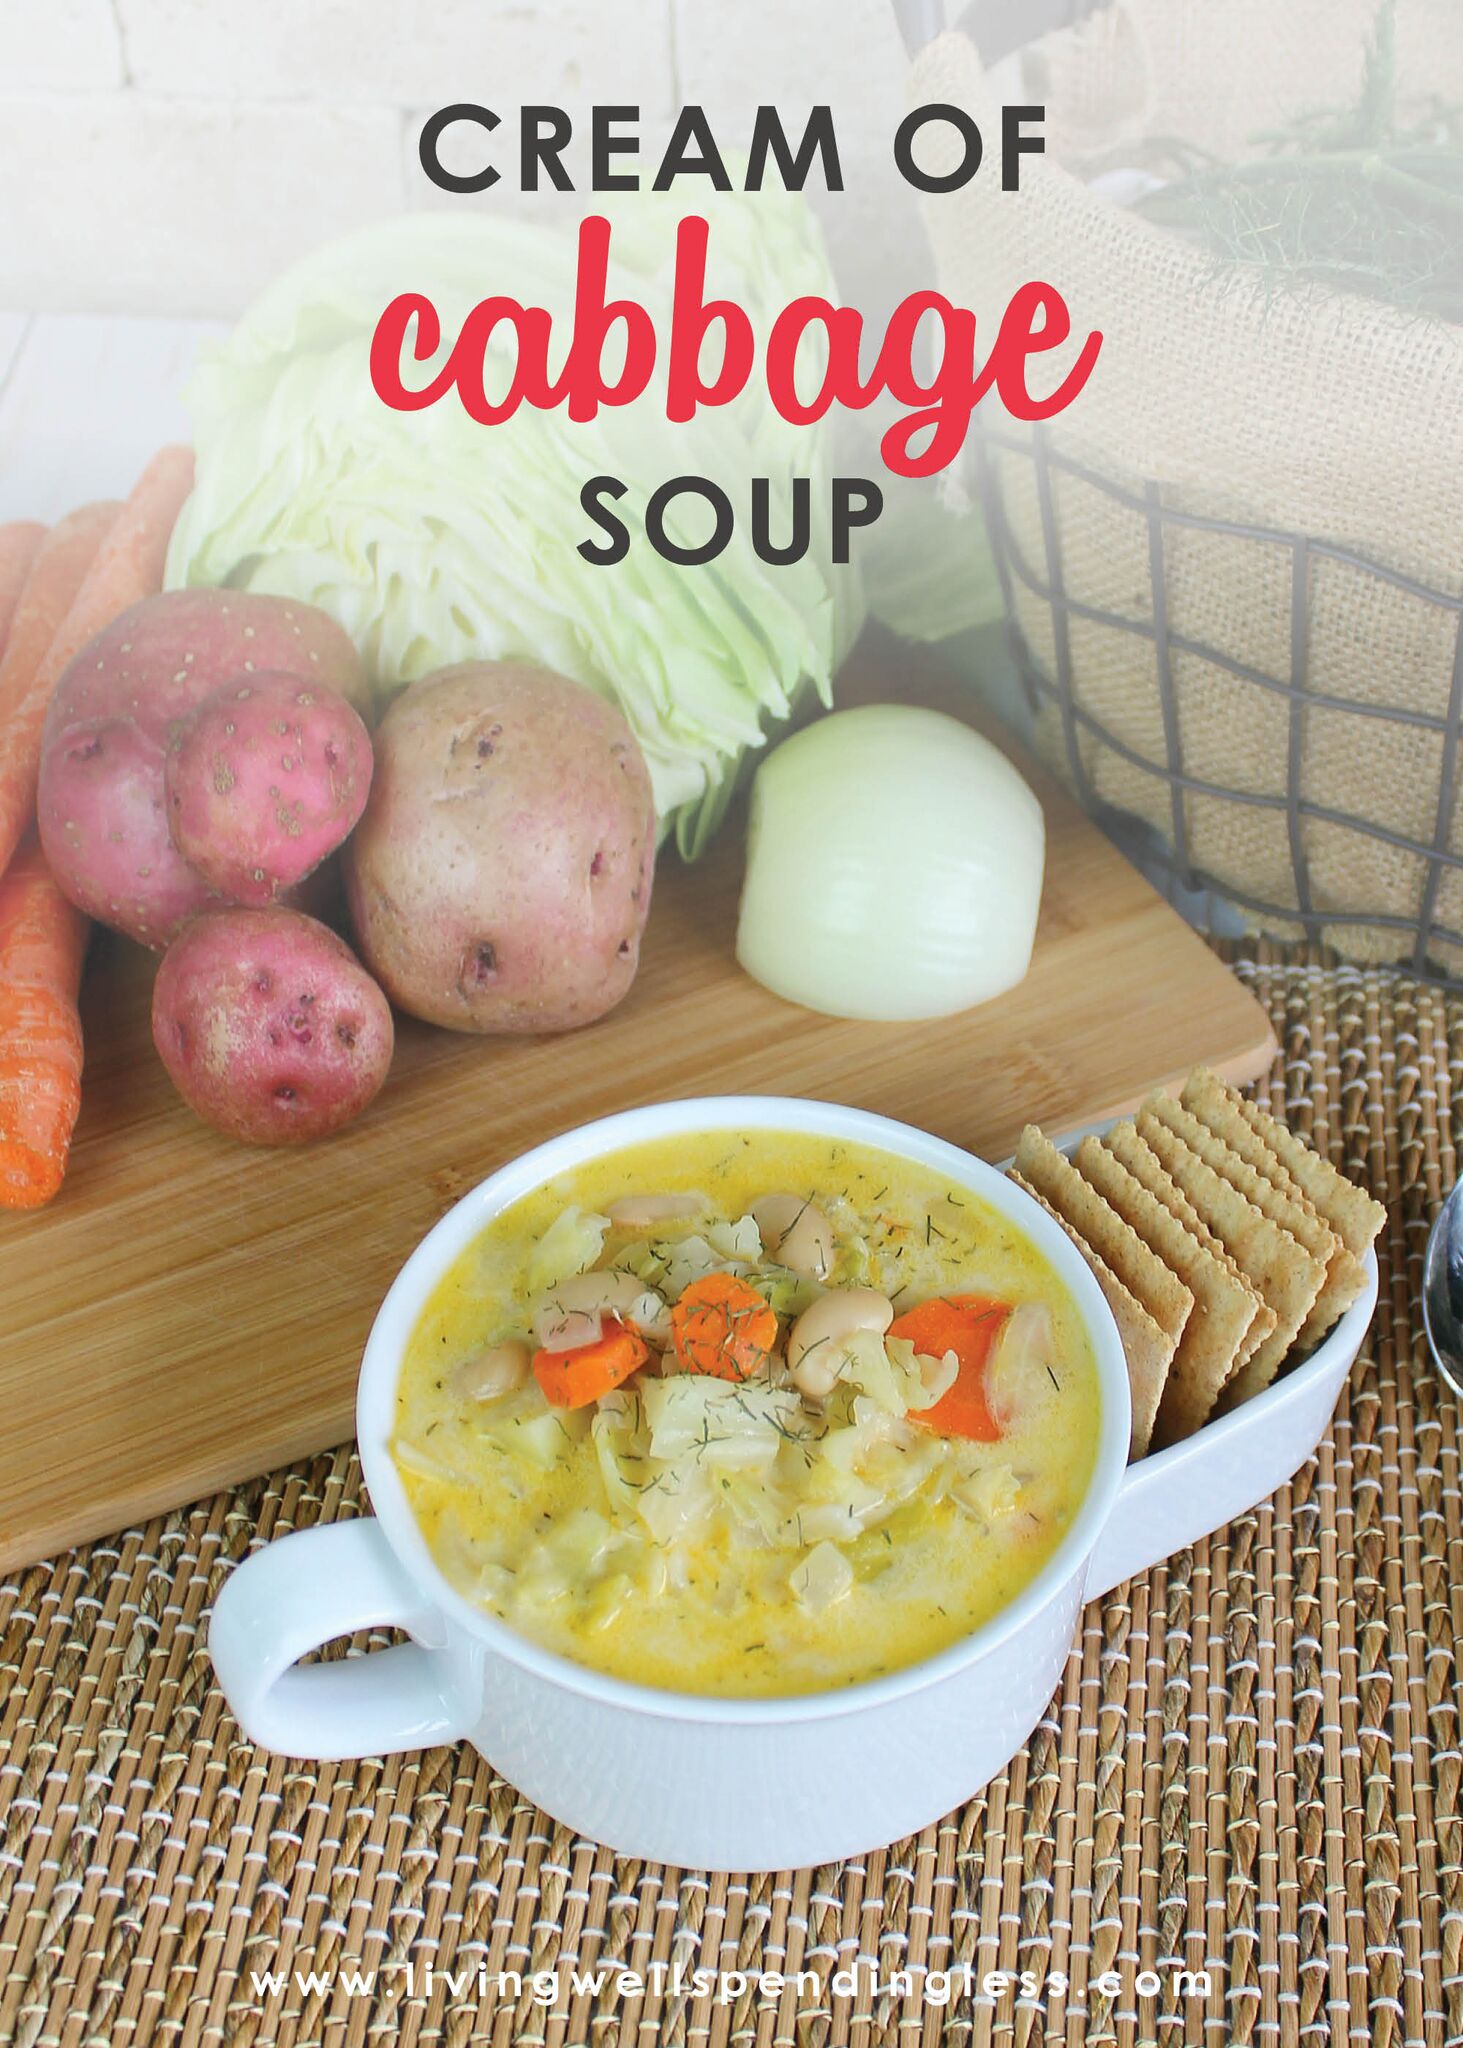 Need a creative recipe for your winter vegetables? Nothing beats soup to warm up on a cool day. You get both with our Cream of Cabbage Soup that even the kids will enjoy.